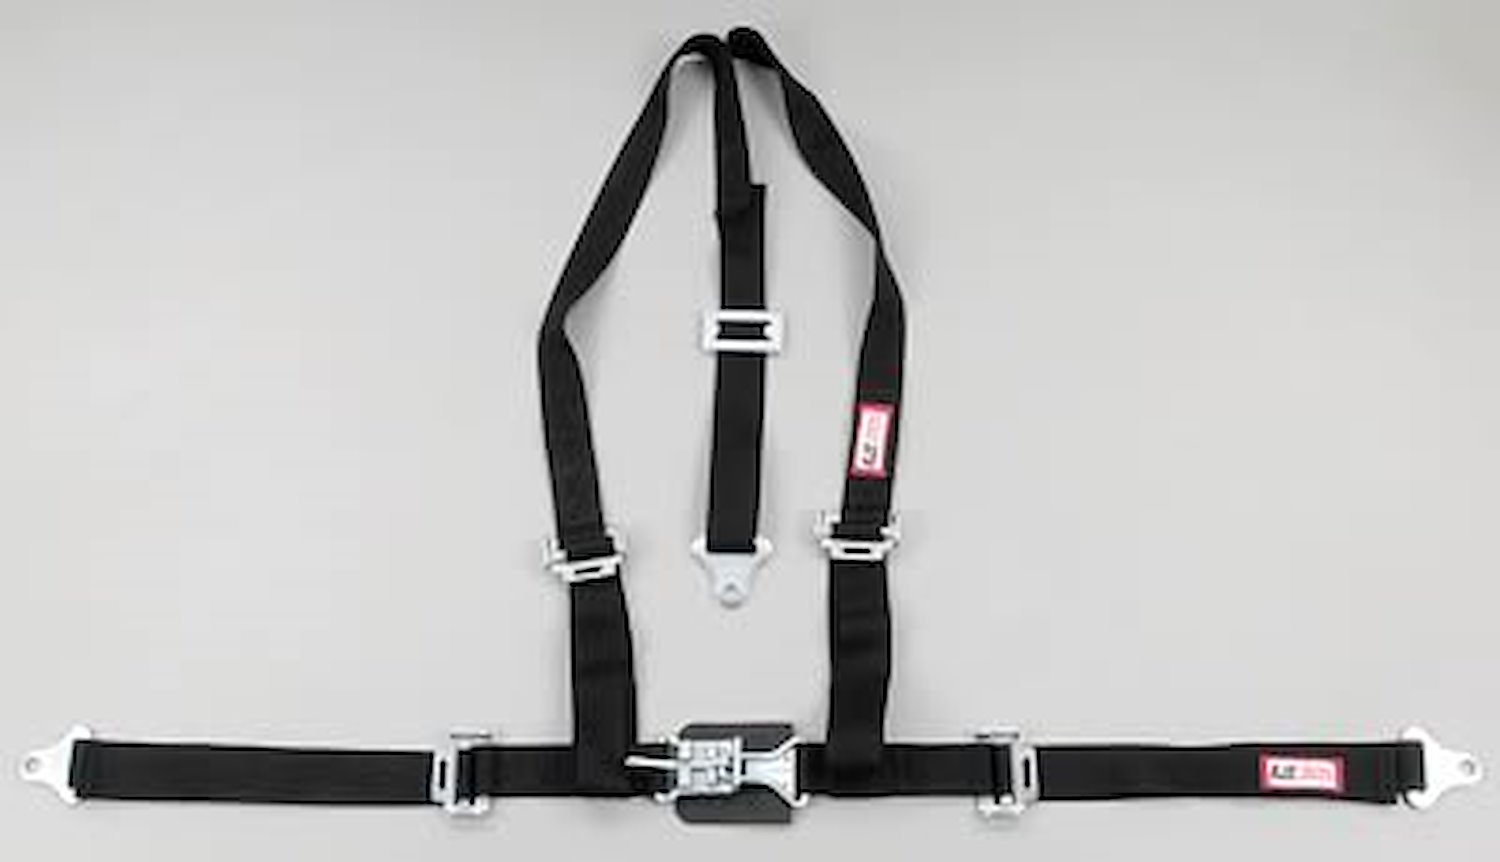 NON-SFI L&L HARNESS 3 PULL UP Lap Belt SNAP SEWN IN 2 S.H. Individual ROLL BAR Mount WRAP/SNAP RED